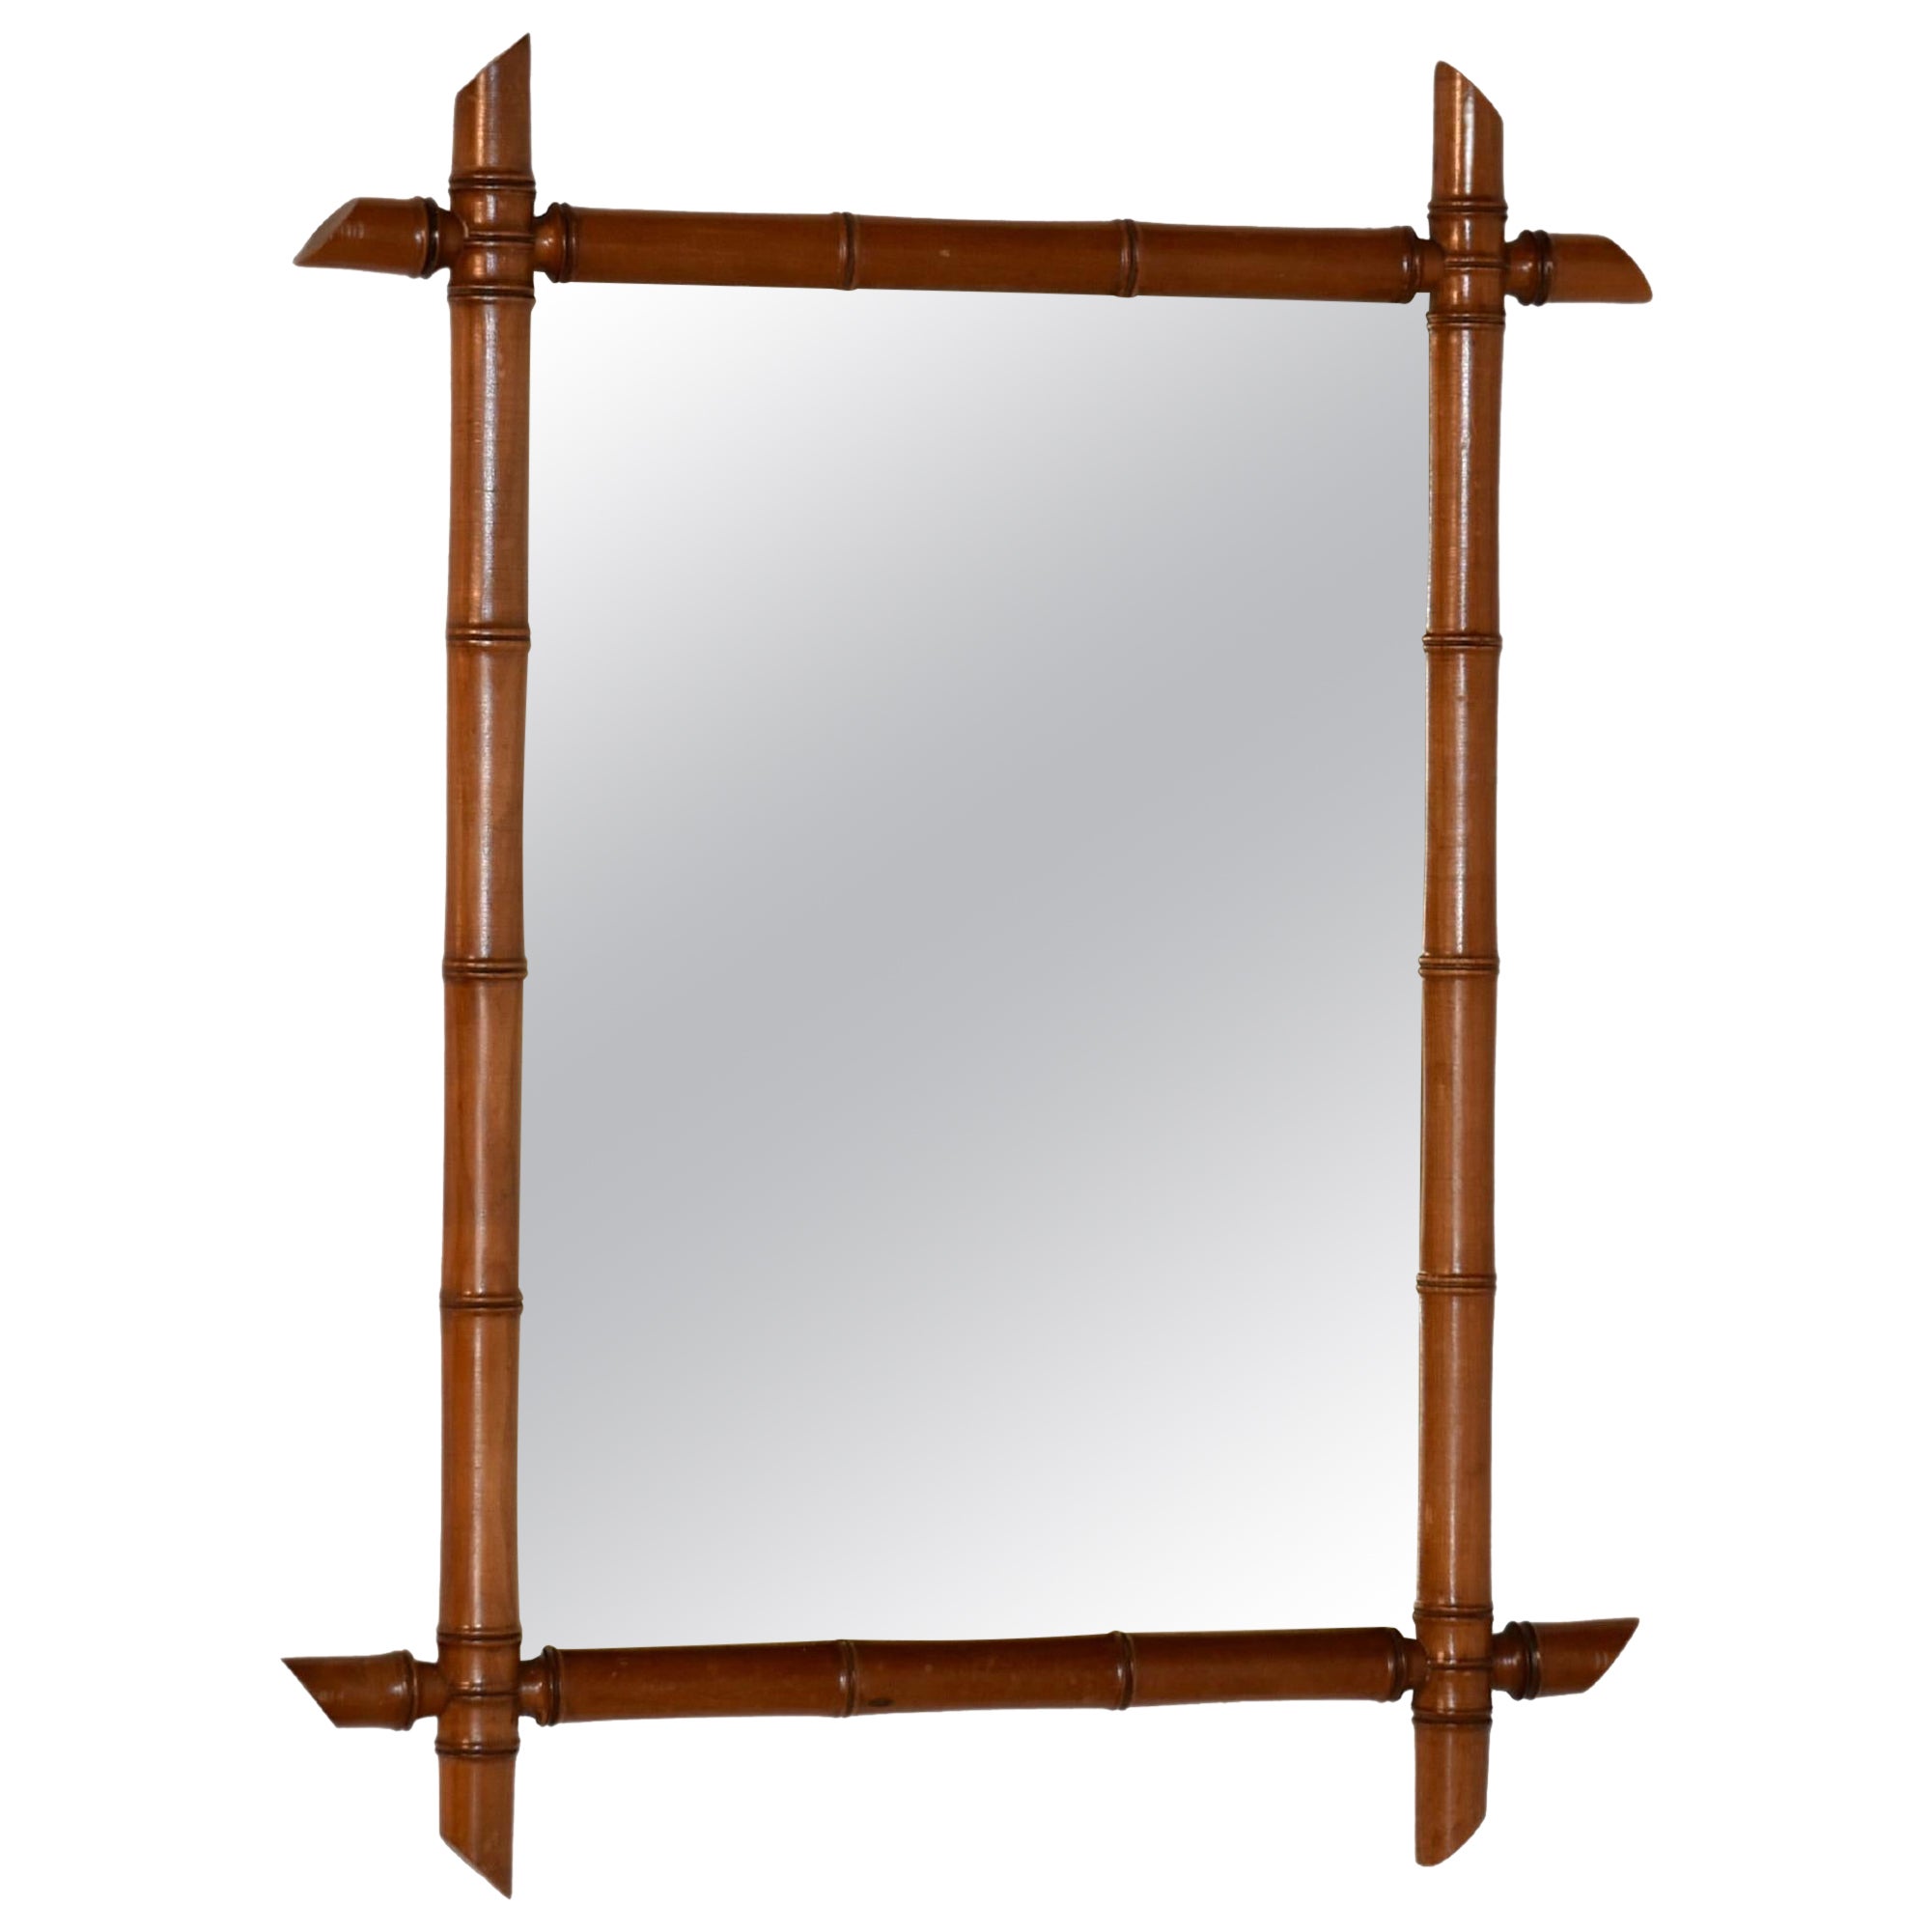 19th Century French Faux Bamboo Mirror